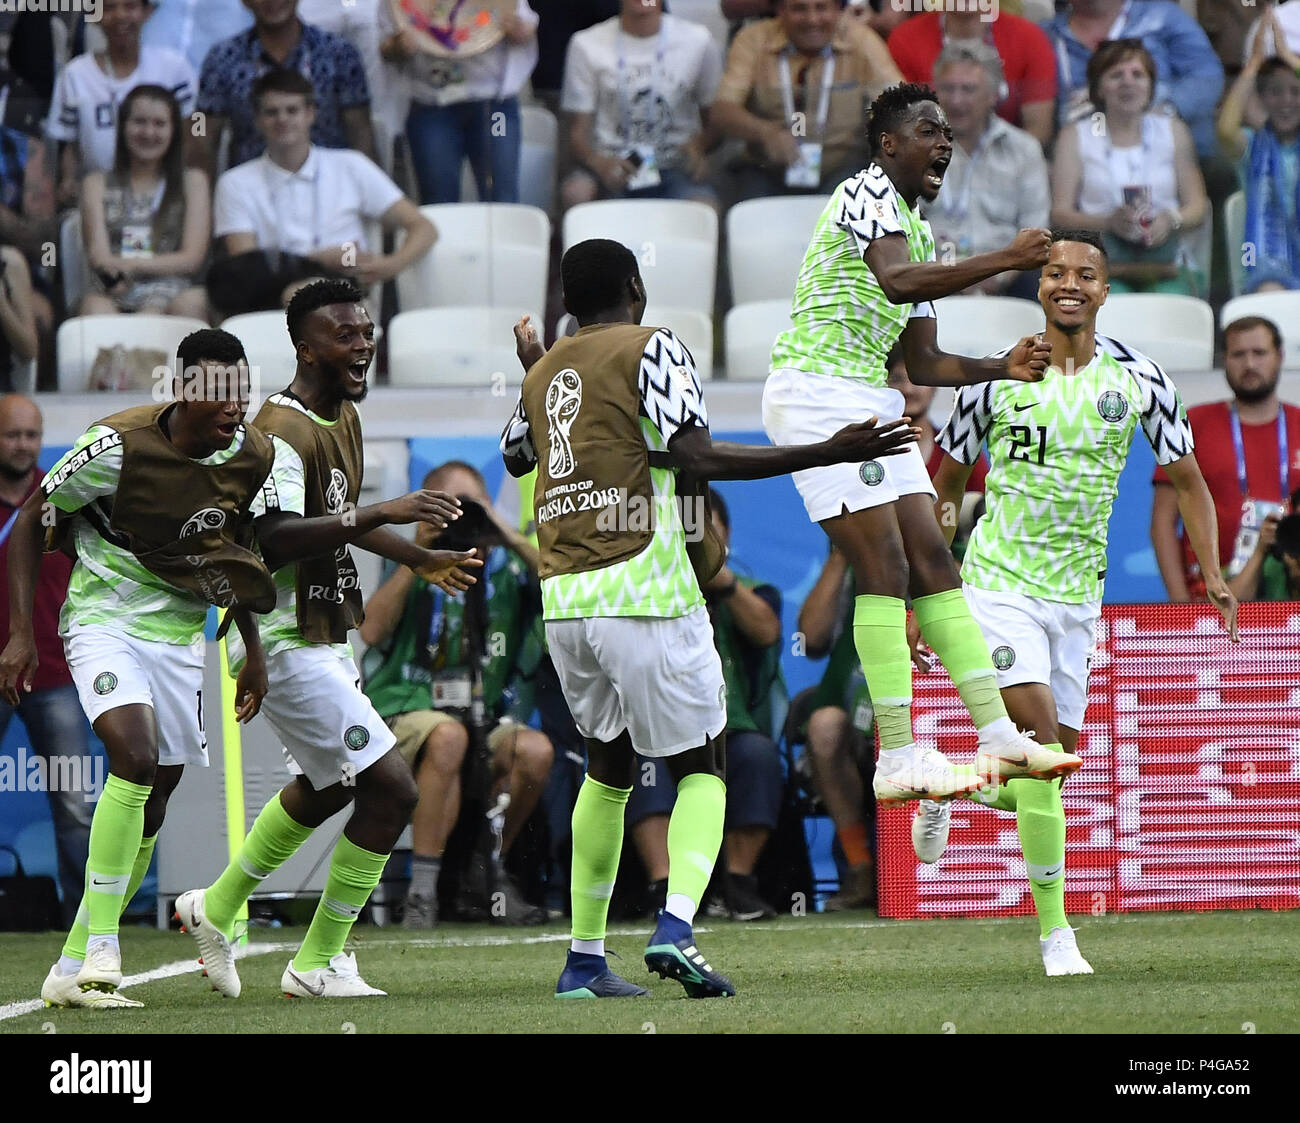 Volgograd, Russia. 22nd June, 2018. Ahmed Musa (2nd R) of Nigeria celebrates scoring during the 2018 FIFA World Cup Group D match between Nigeria and Iceland in Volgograd, Russia, June 22, 2018. Credit: He Canling/Xinhua/Alamy Live News Stock Photo